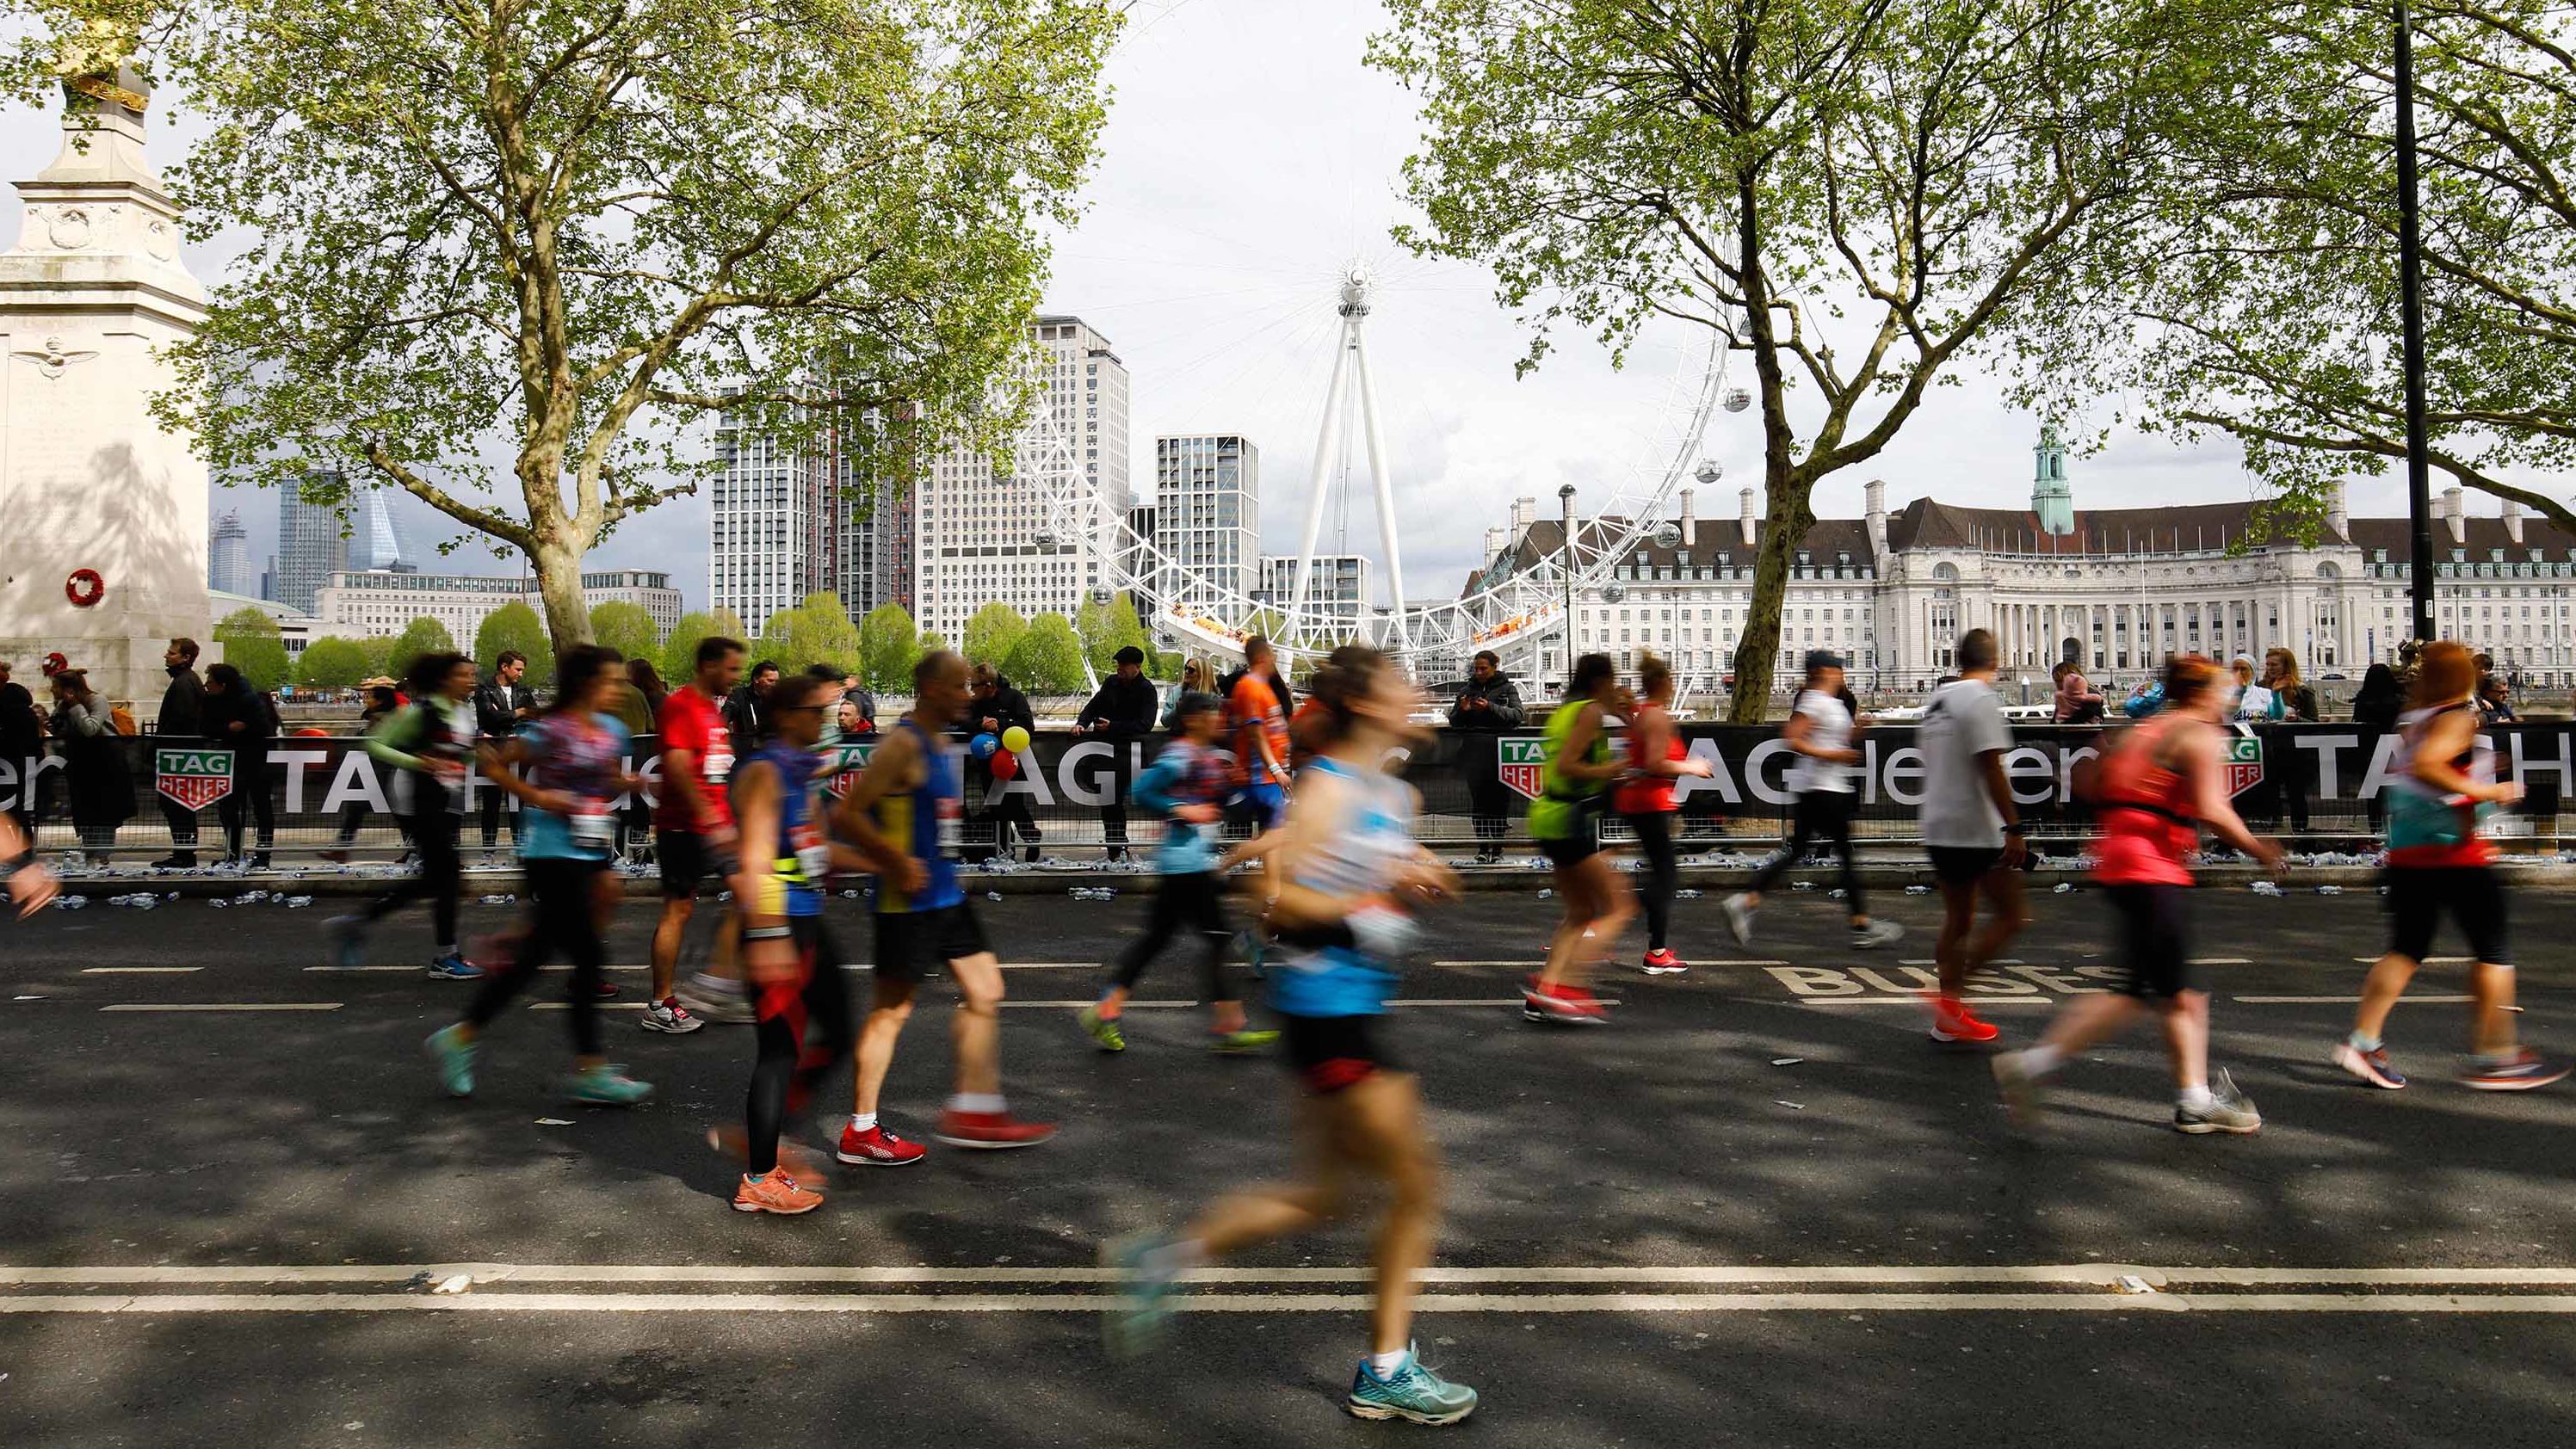 Competitors run along The Embankment with the London Eye seen in the background during the 2019 London Marathon on April 28.